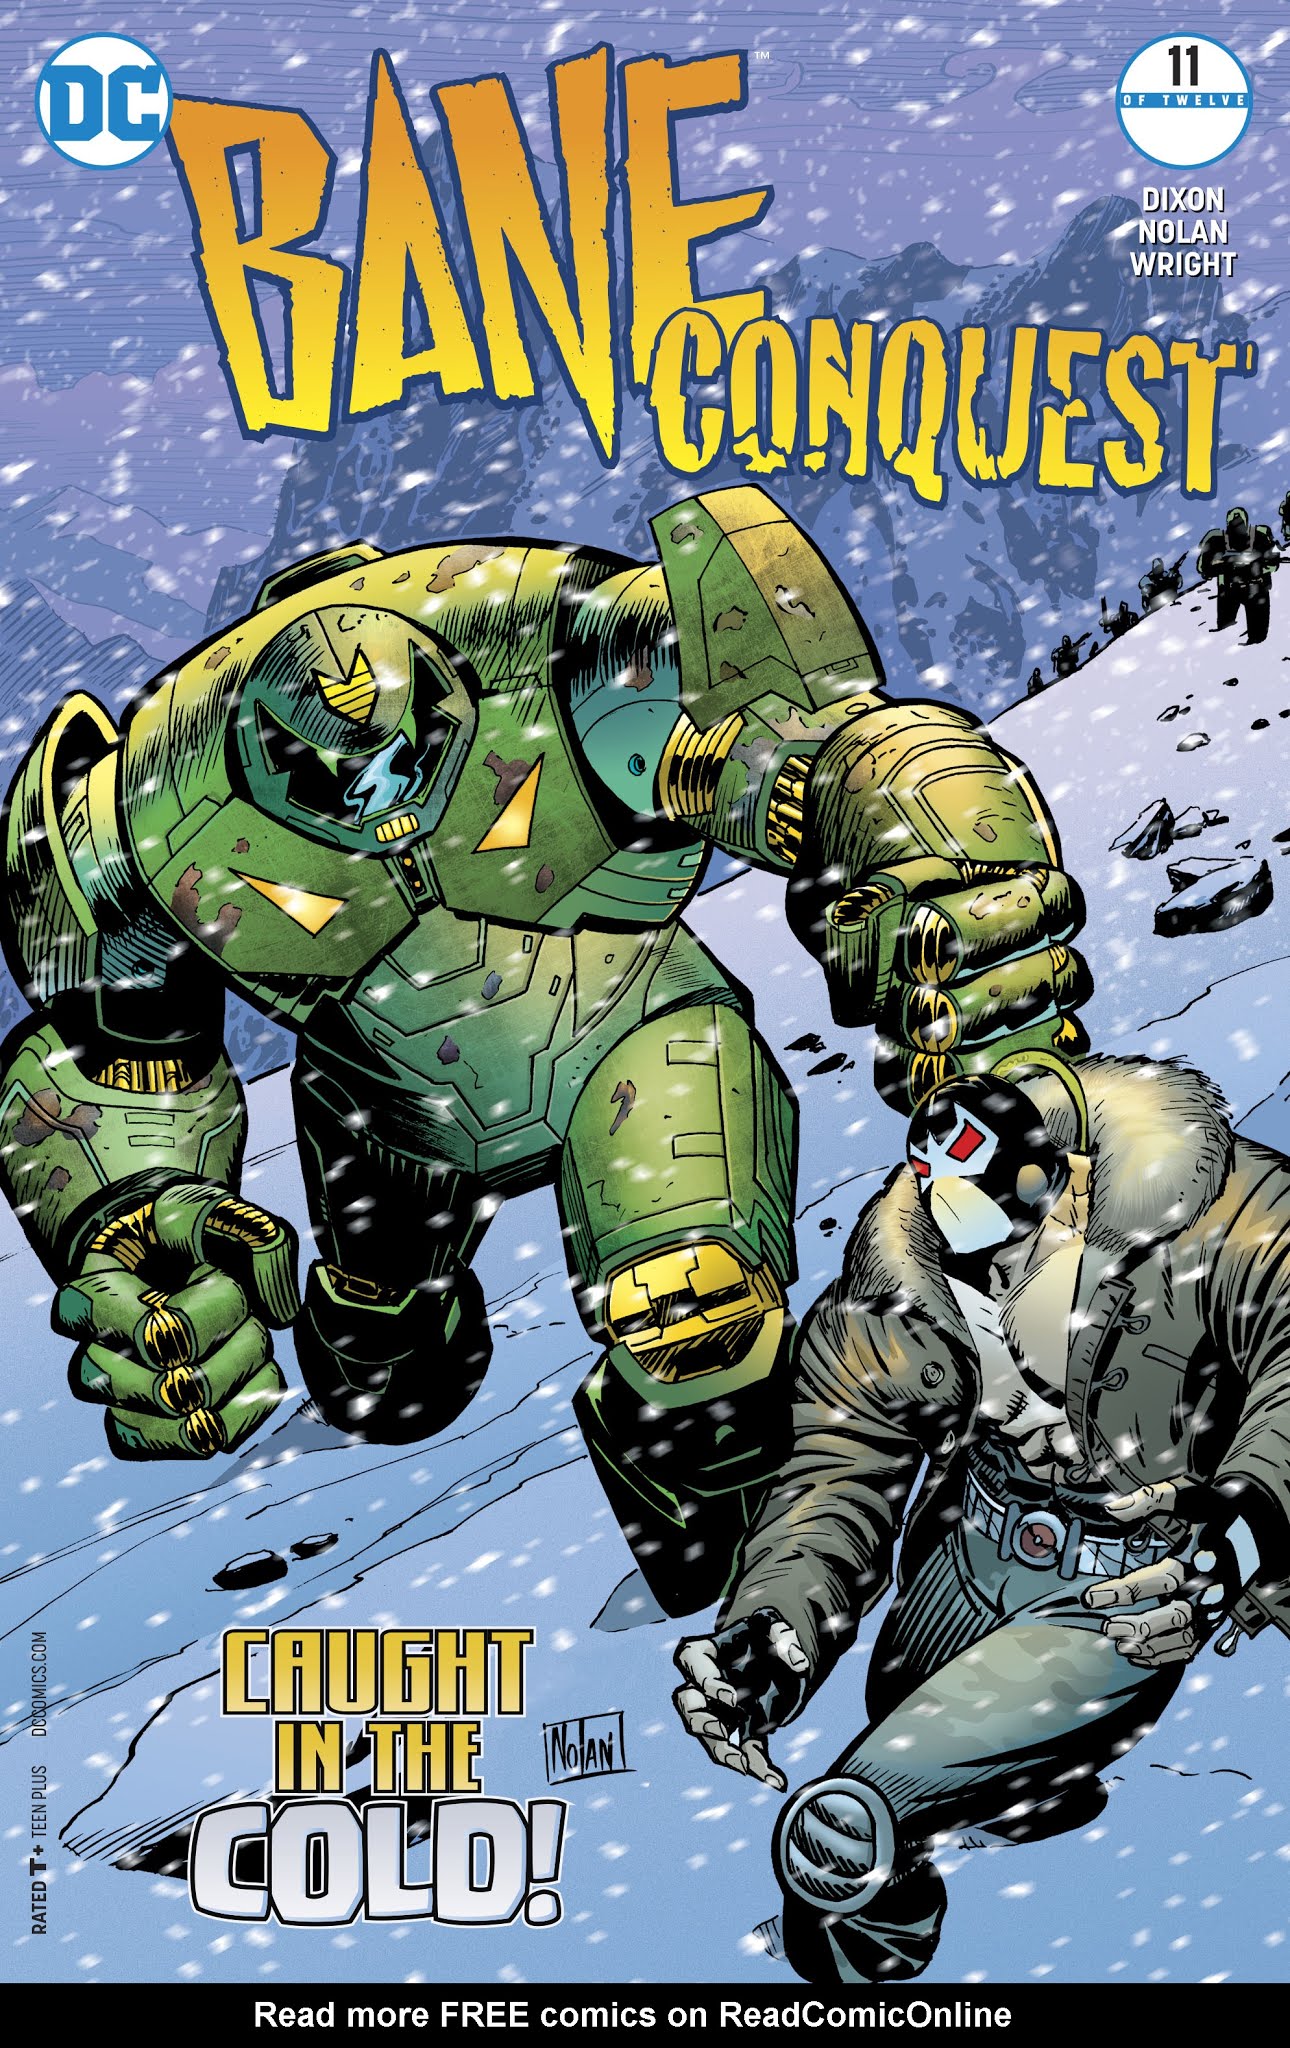 Read online Bane: Conquest comic -  Issue #11 - 1